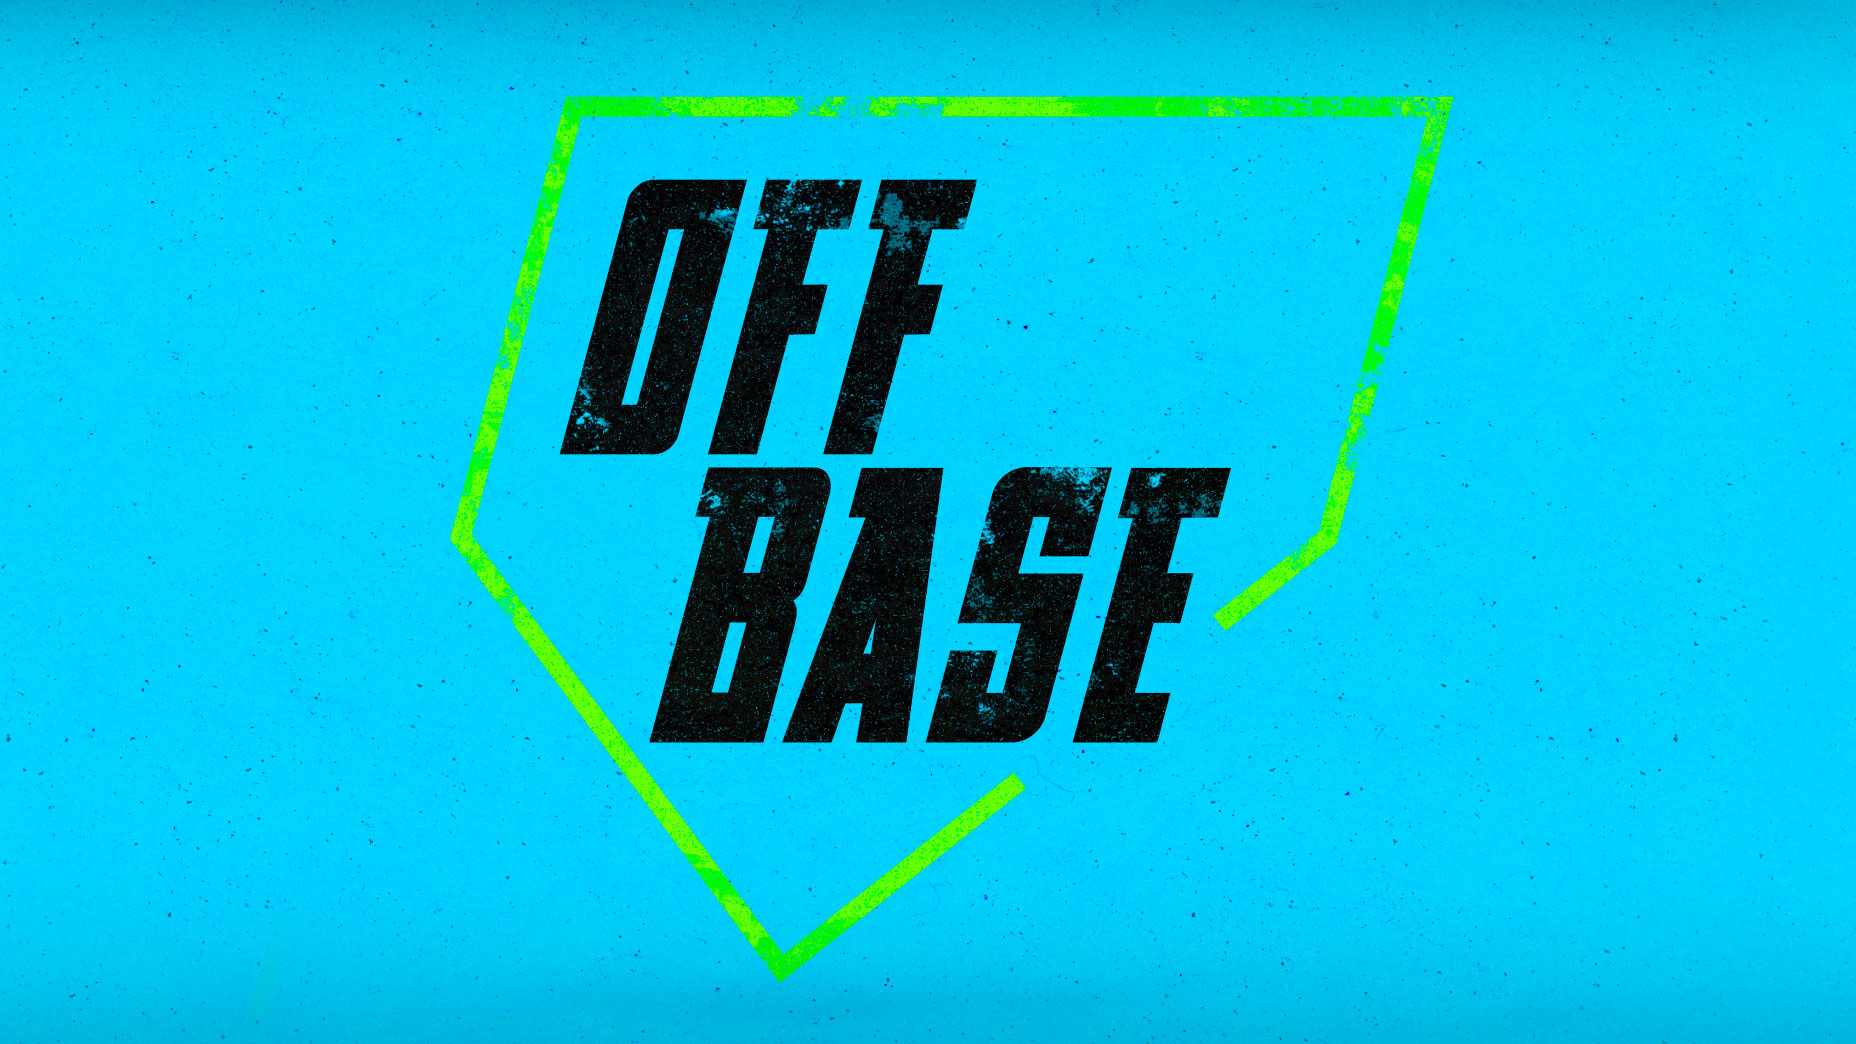 MLB Off Base logo: A neon-green outline of home plate on a bright blue background, the words ''OFF BASE'' inside the outline in black